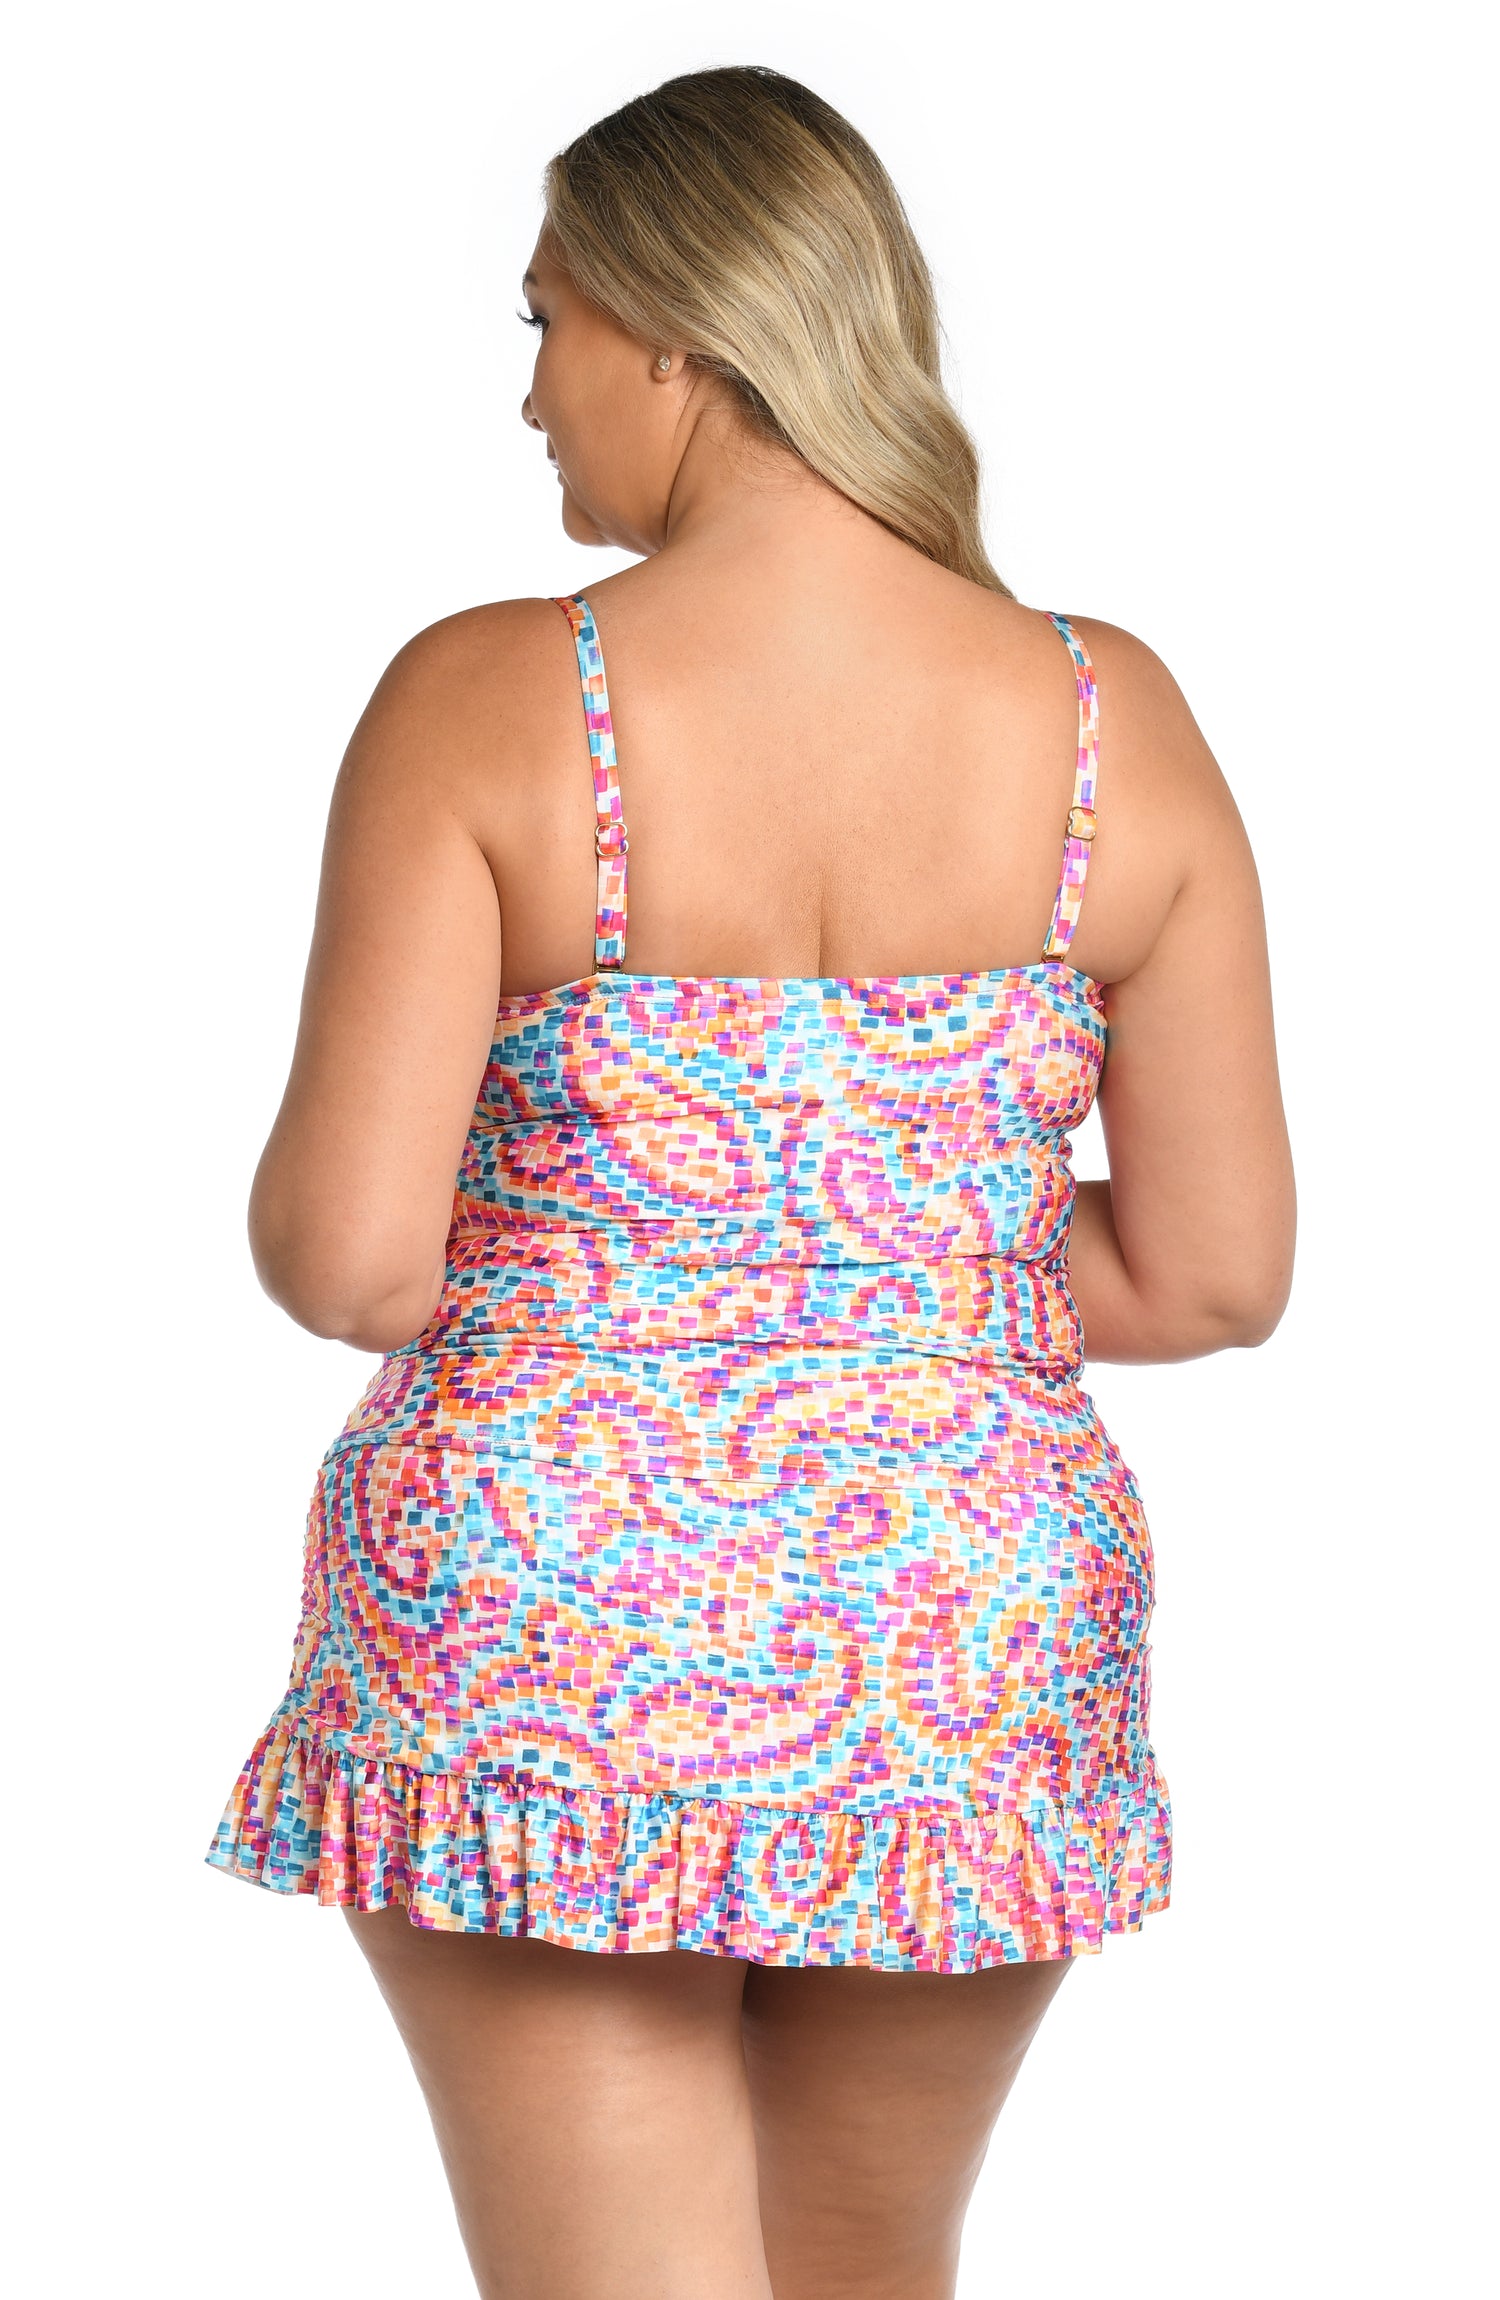 Model is wearing a pink multicolored paisley printed bandeau tankini top from our Pebble Beach collection.